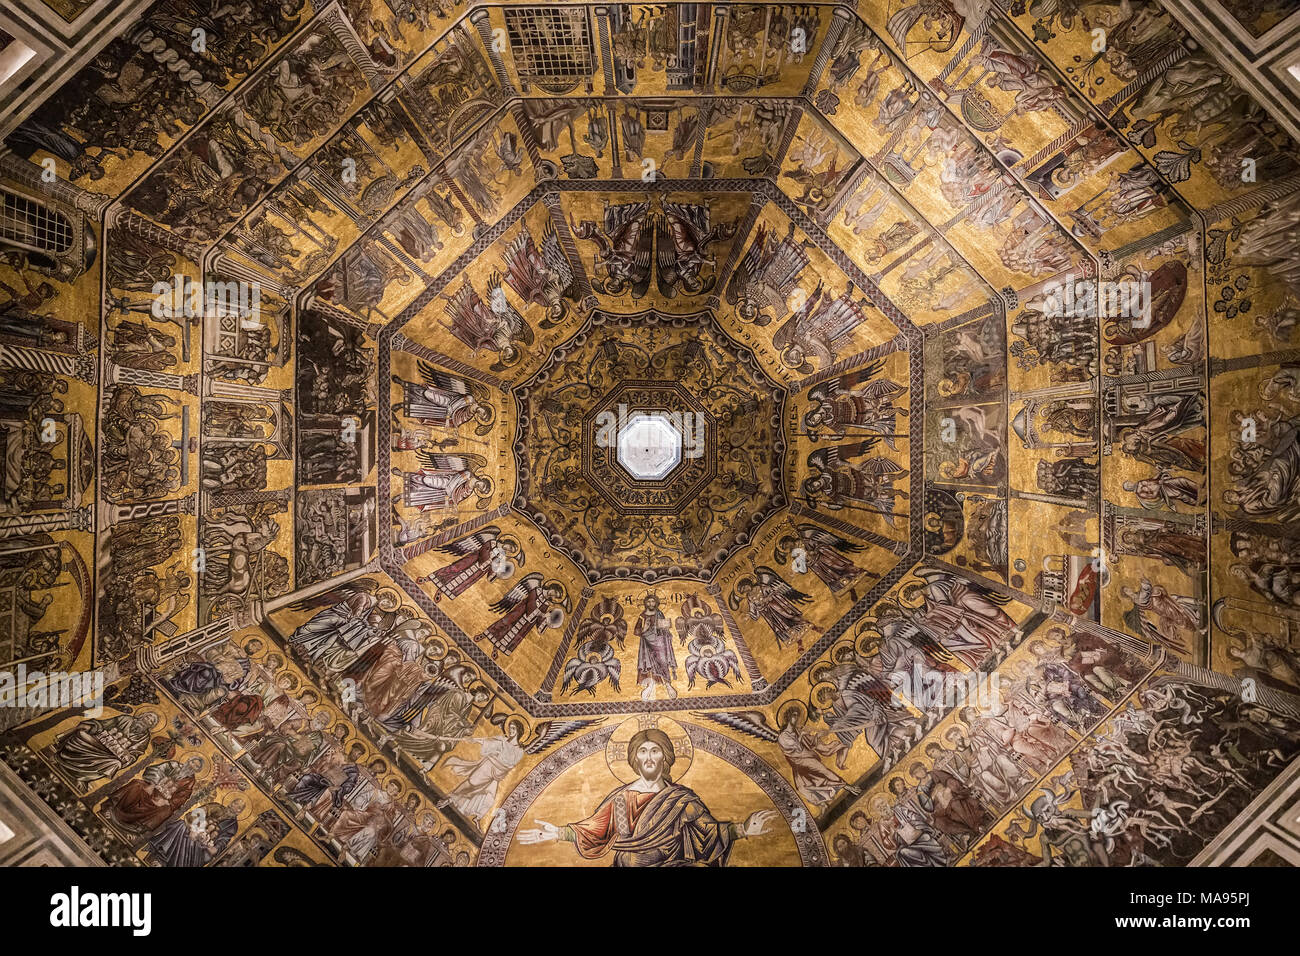 Byzantine mosaics XIII-XIV centuries on the dome of the Florence Baptistery, also known as the Baptistery of Saint Ehn. Florence, Italy. Stock Photo